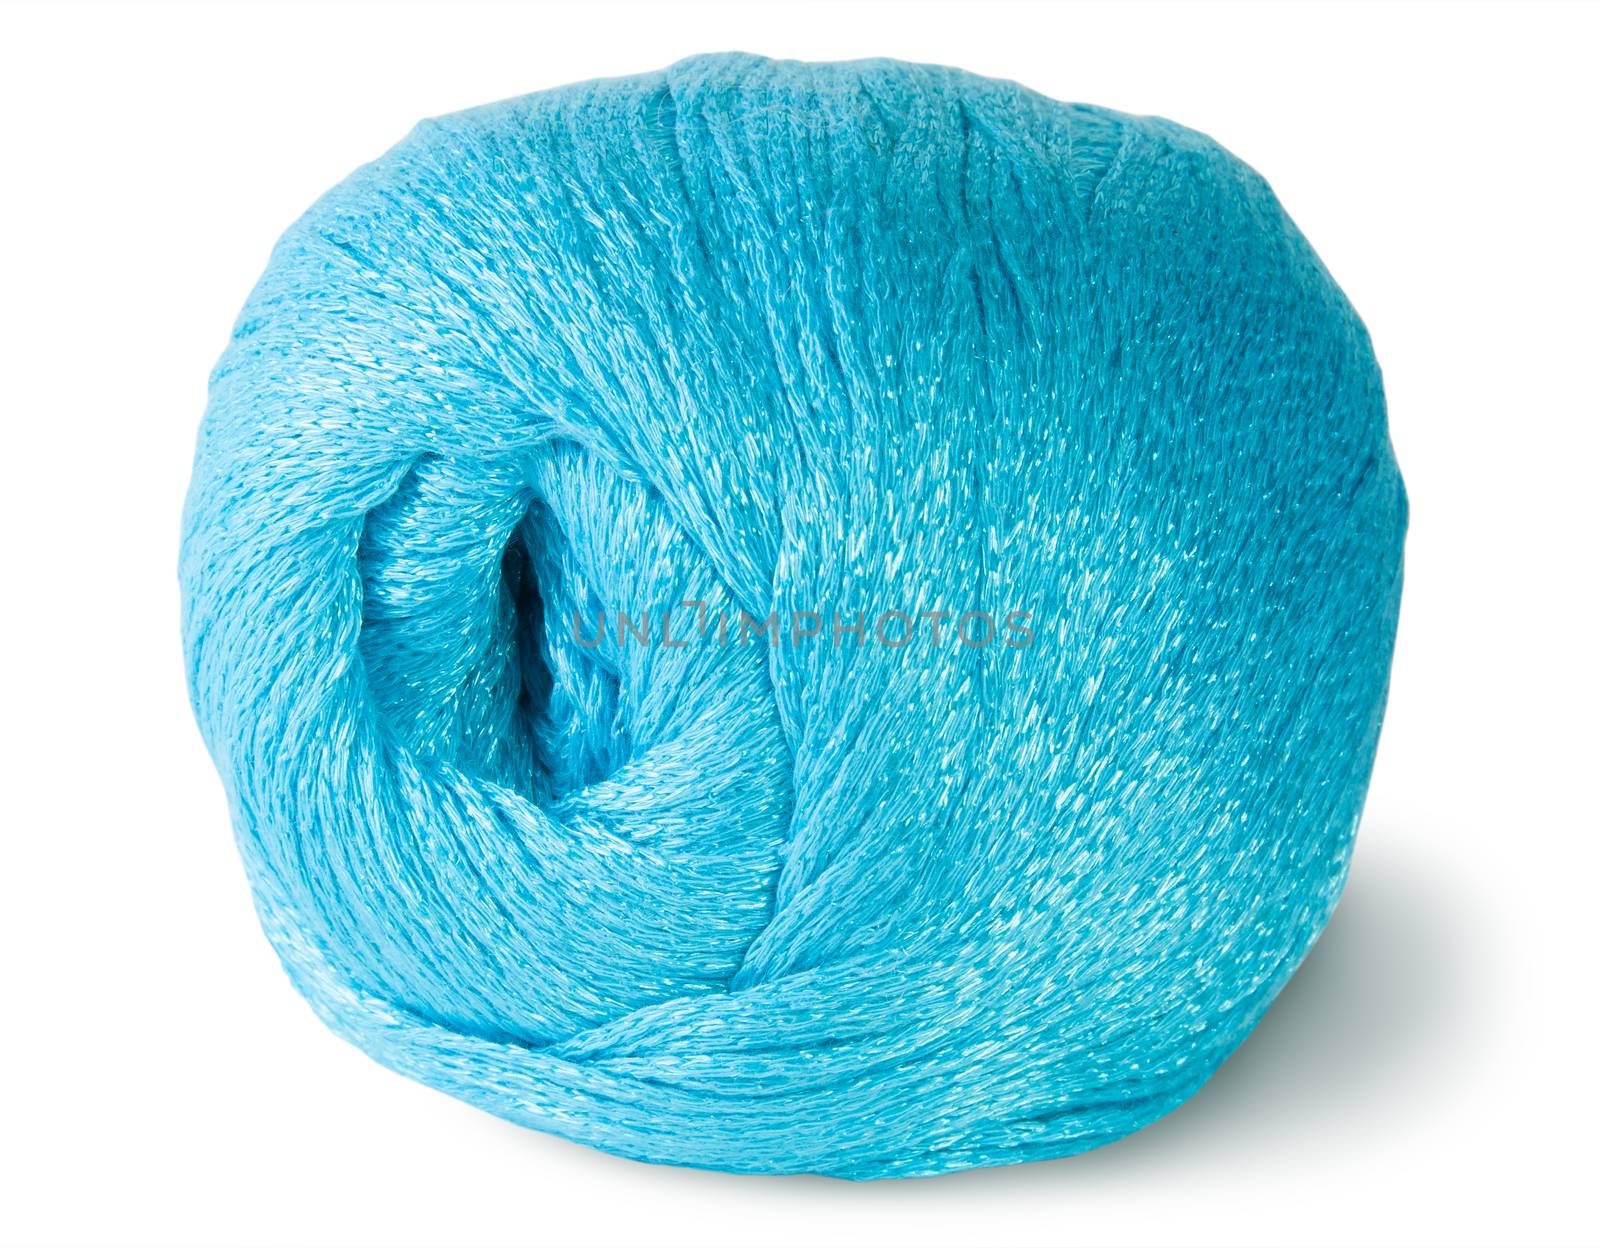 Blue knitting yarn clew isolated on white background